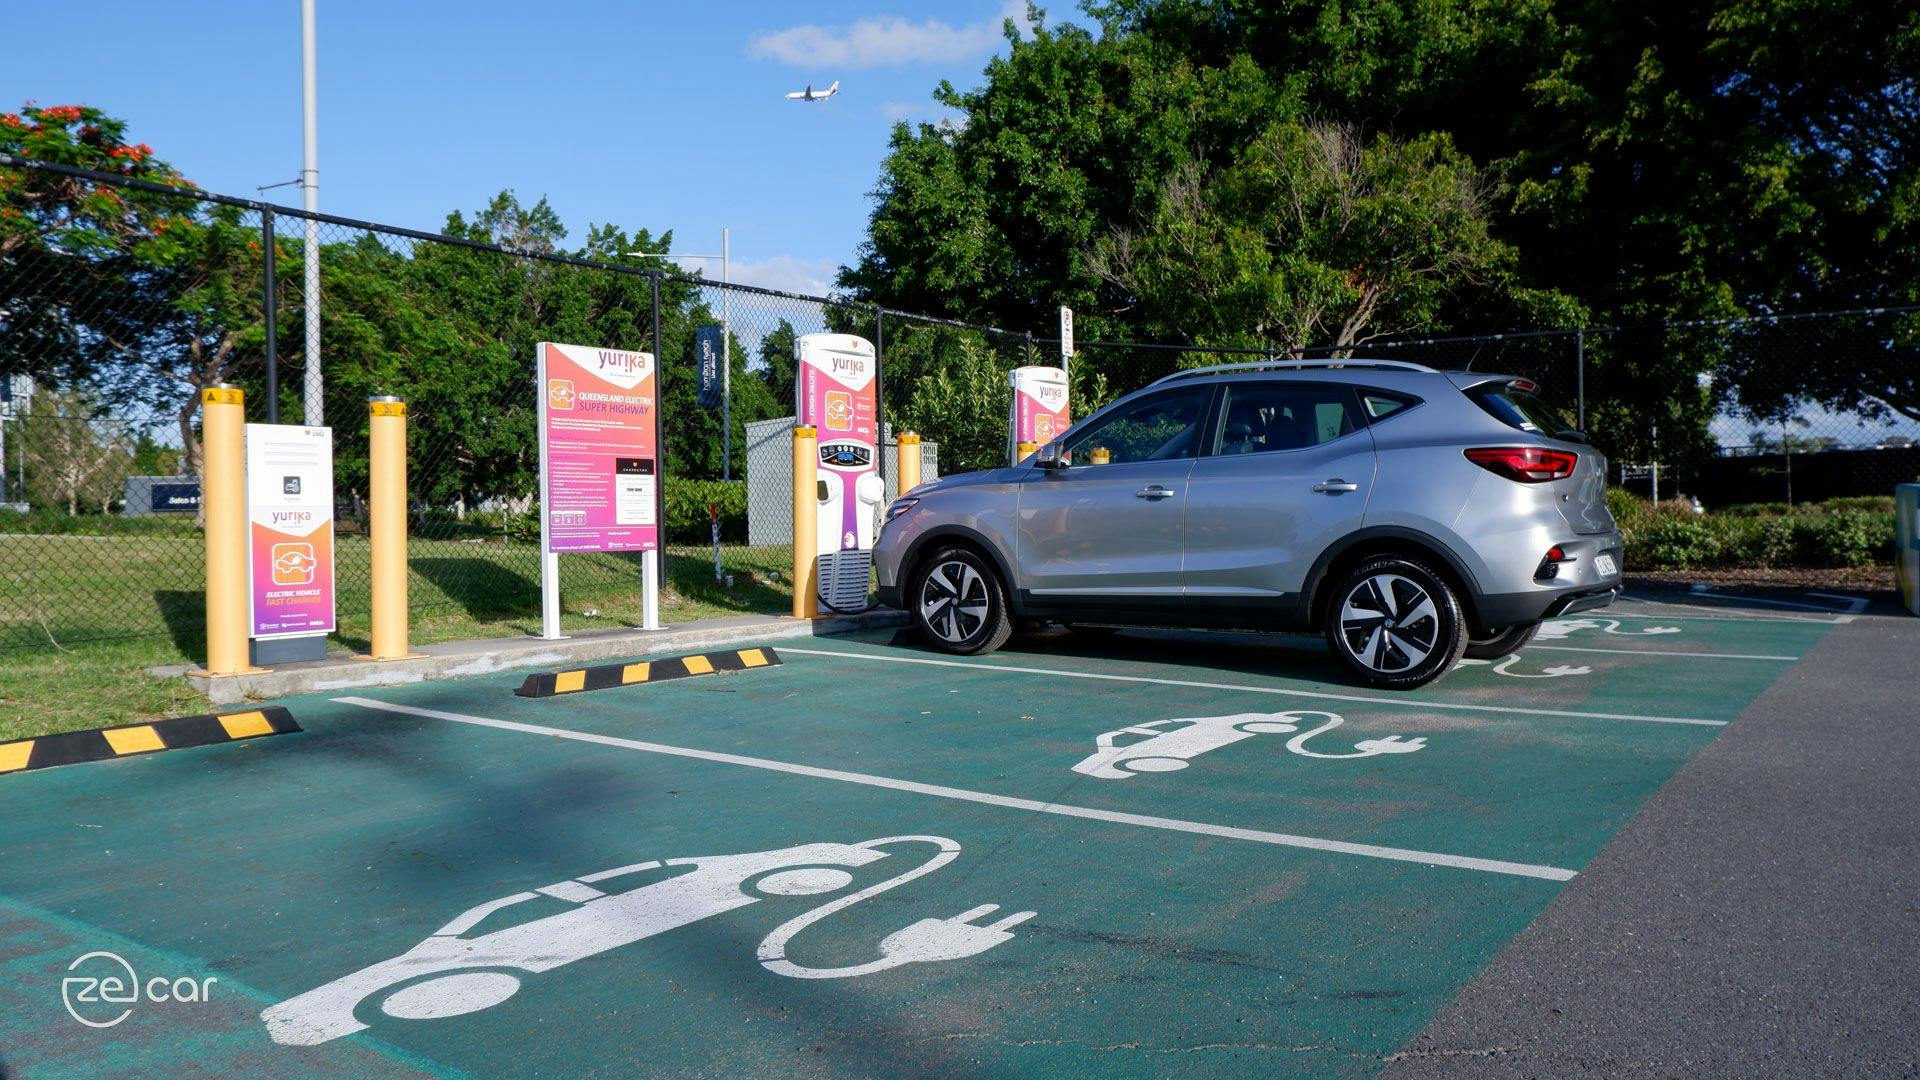 MG ZS EV charging at Chargefox public charger